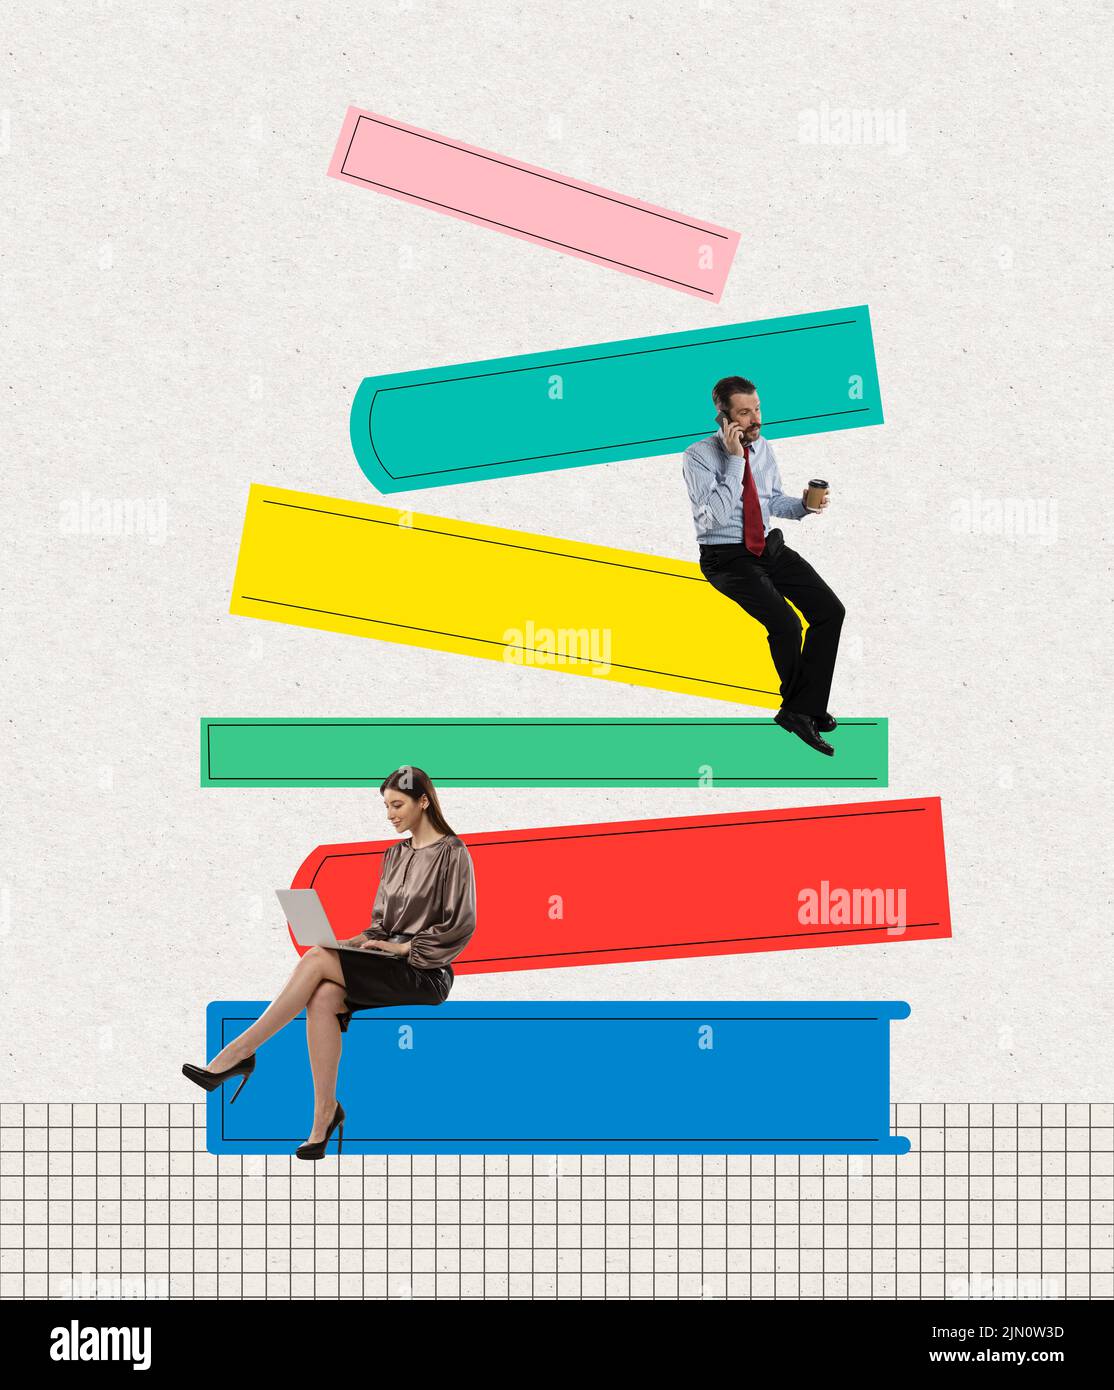 Creative image with man and woman sitting on drawn pile books over light background. Contemporary artwork. Stock Photo